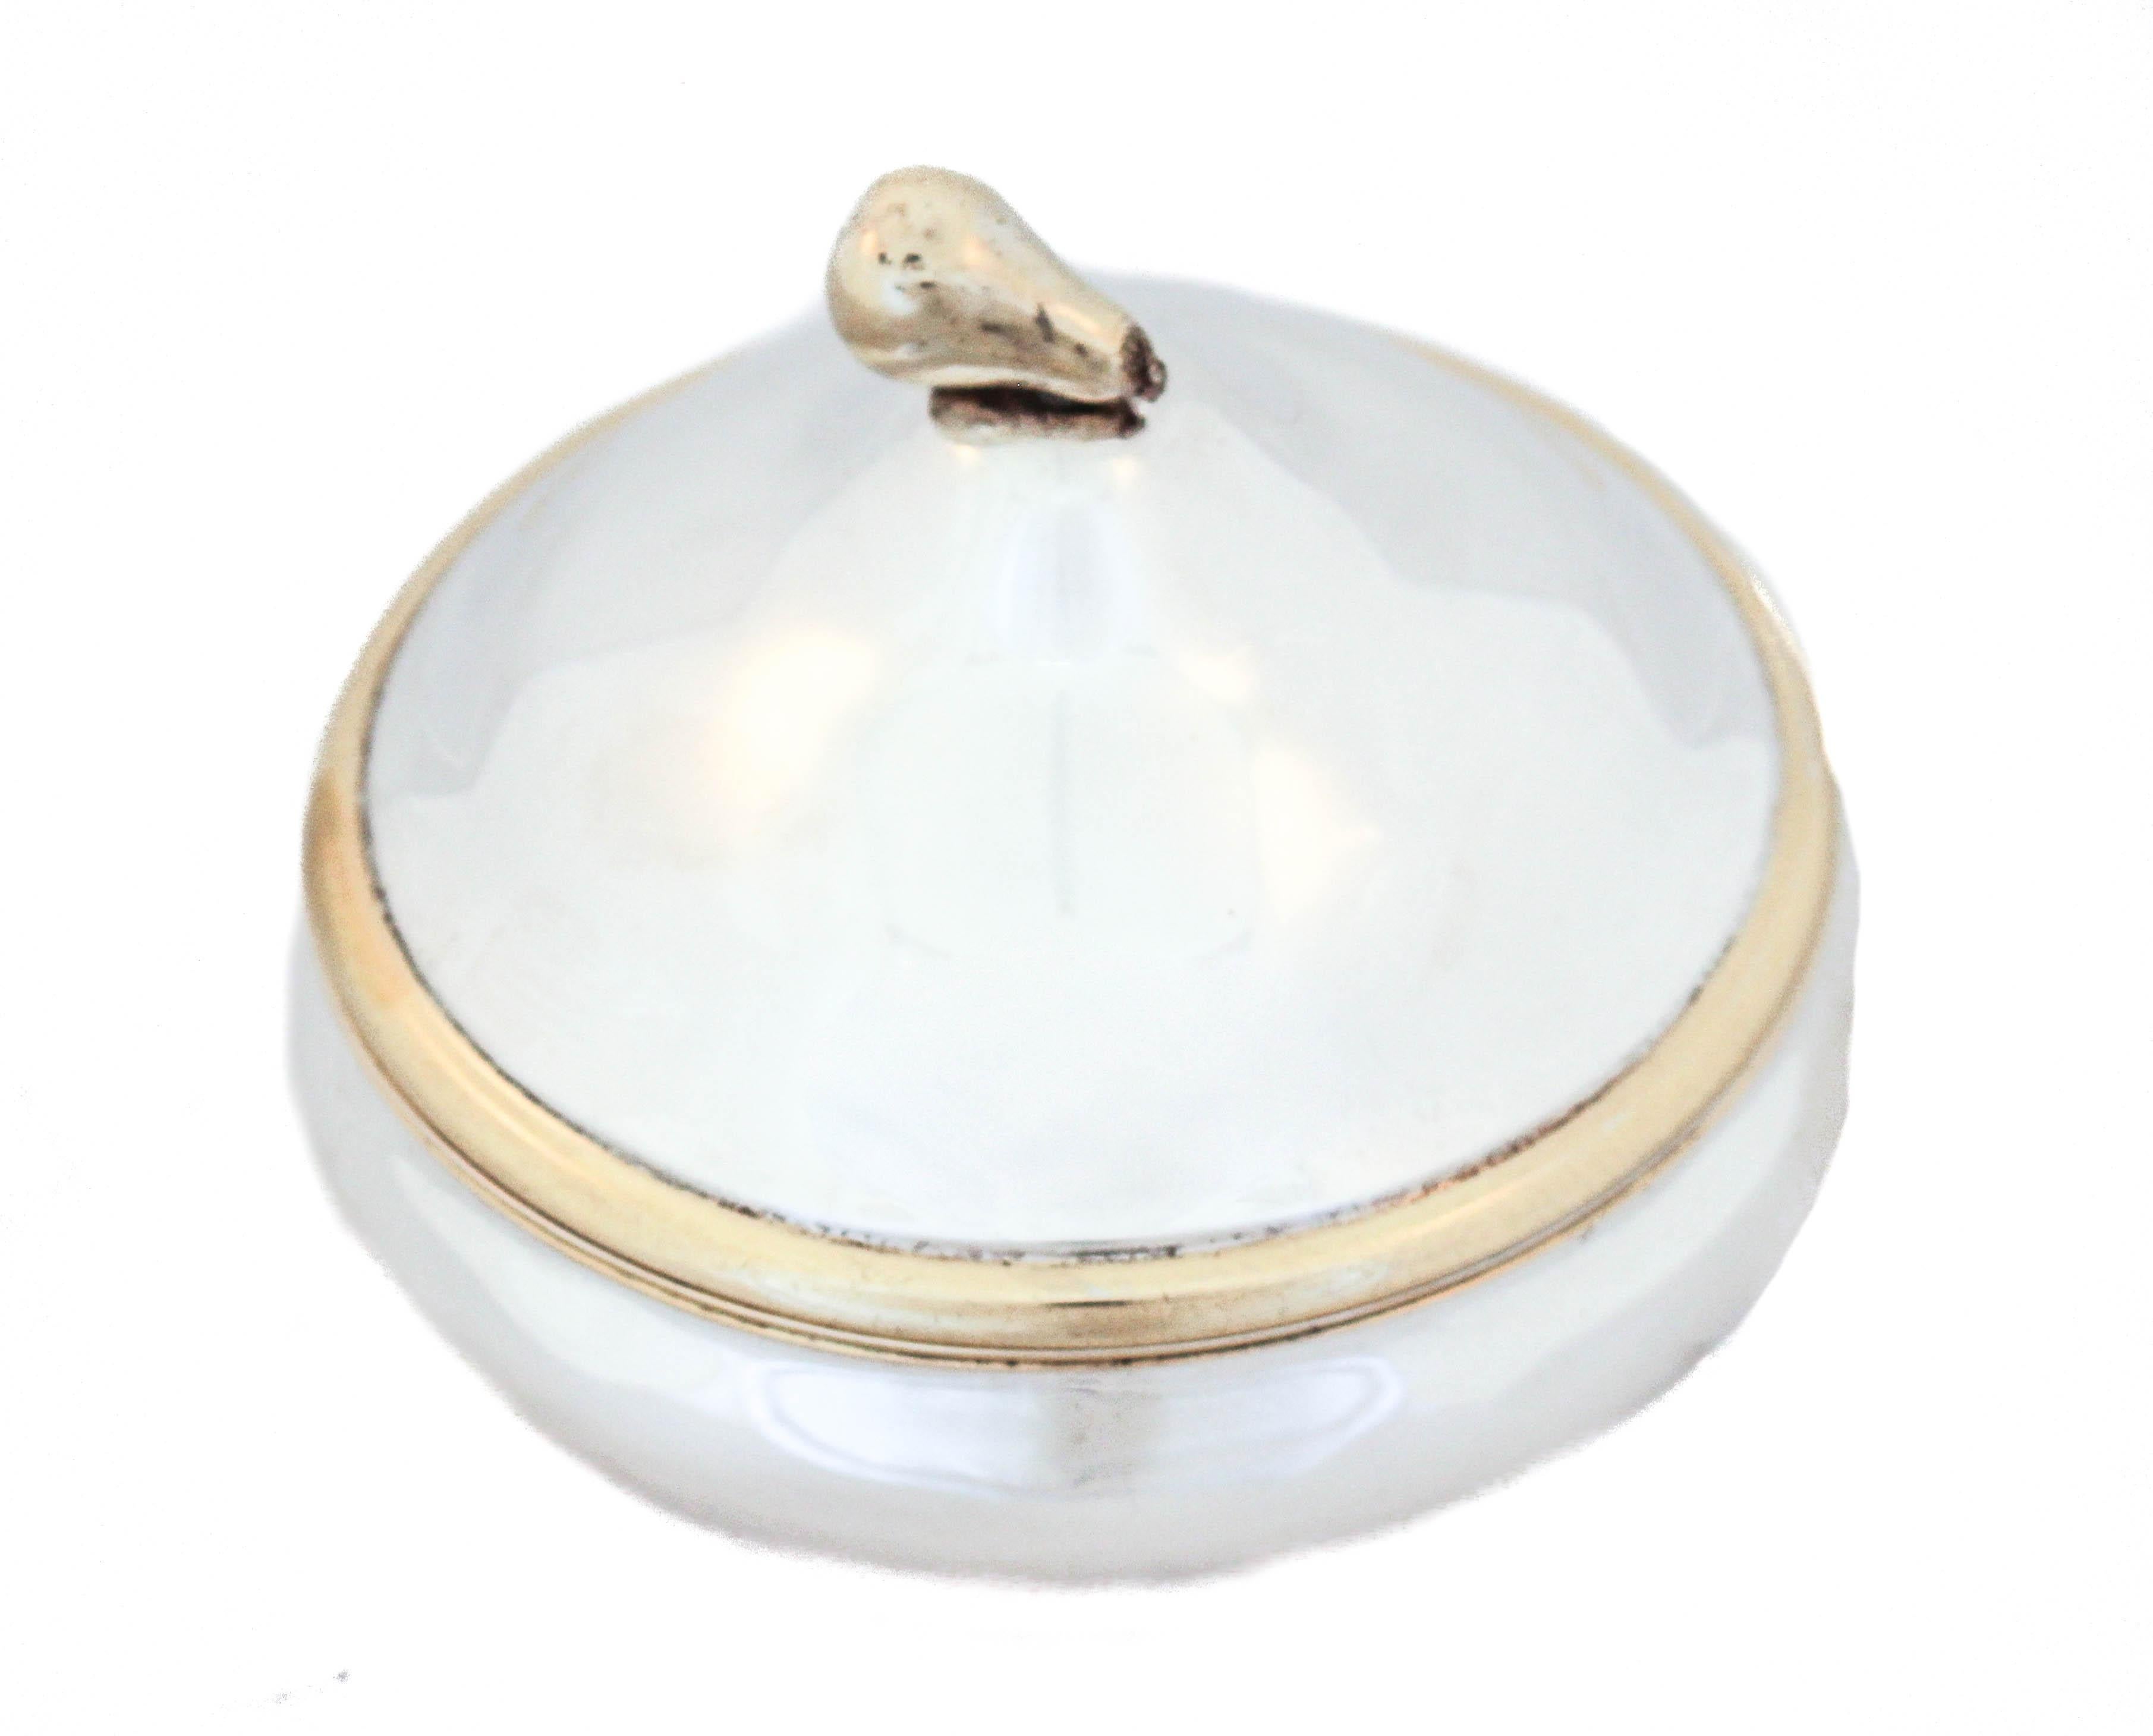 Being offered is a sterling silver round box with a domed lid. The finial is shaped like a pear and is gold washed as is the rim of the cover. The inside lid and bowl are gold washed as well.  This piece can be used for decorative purposes (on a